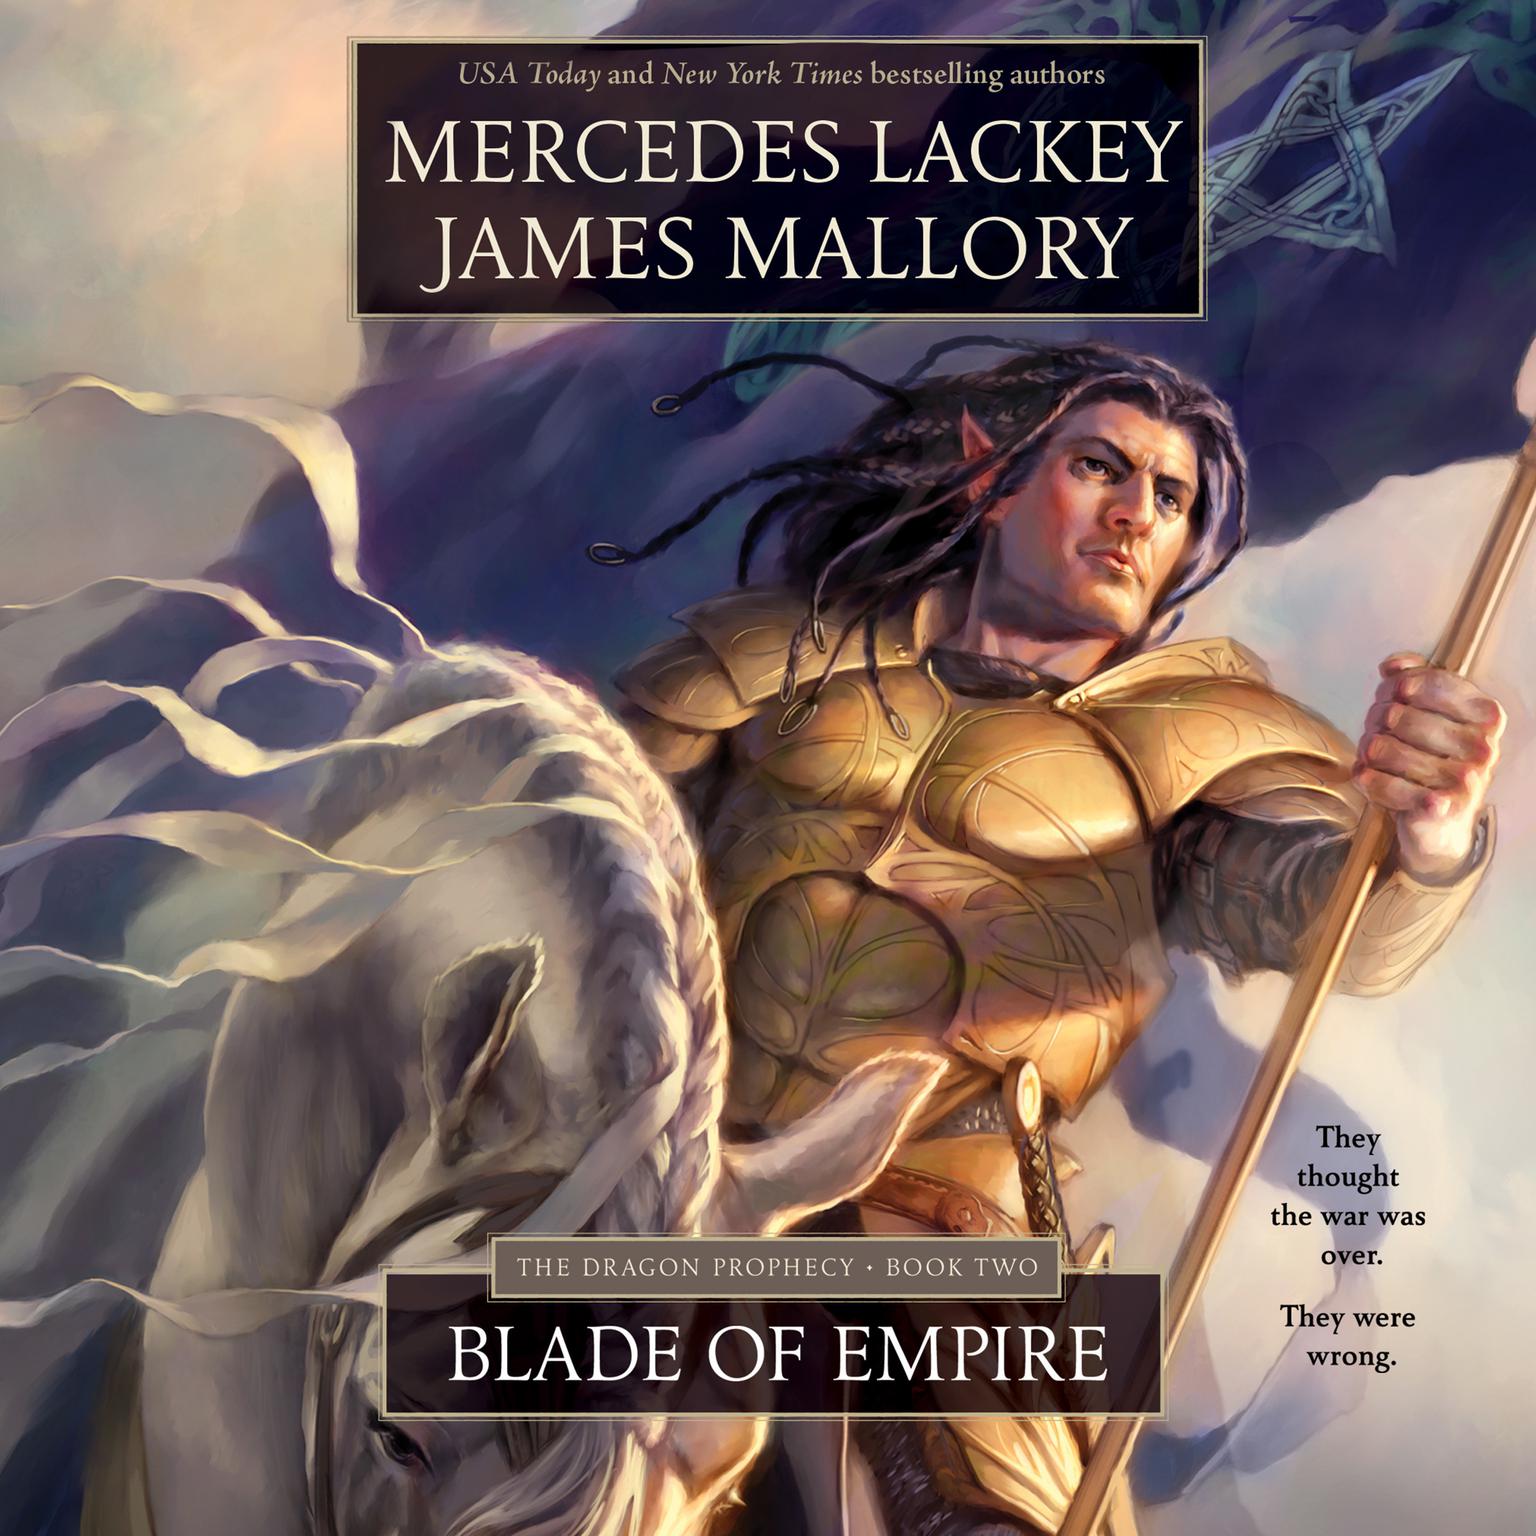 Blade of Empire Audiobook, by Mercedes Lackey